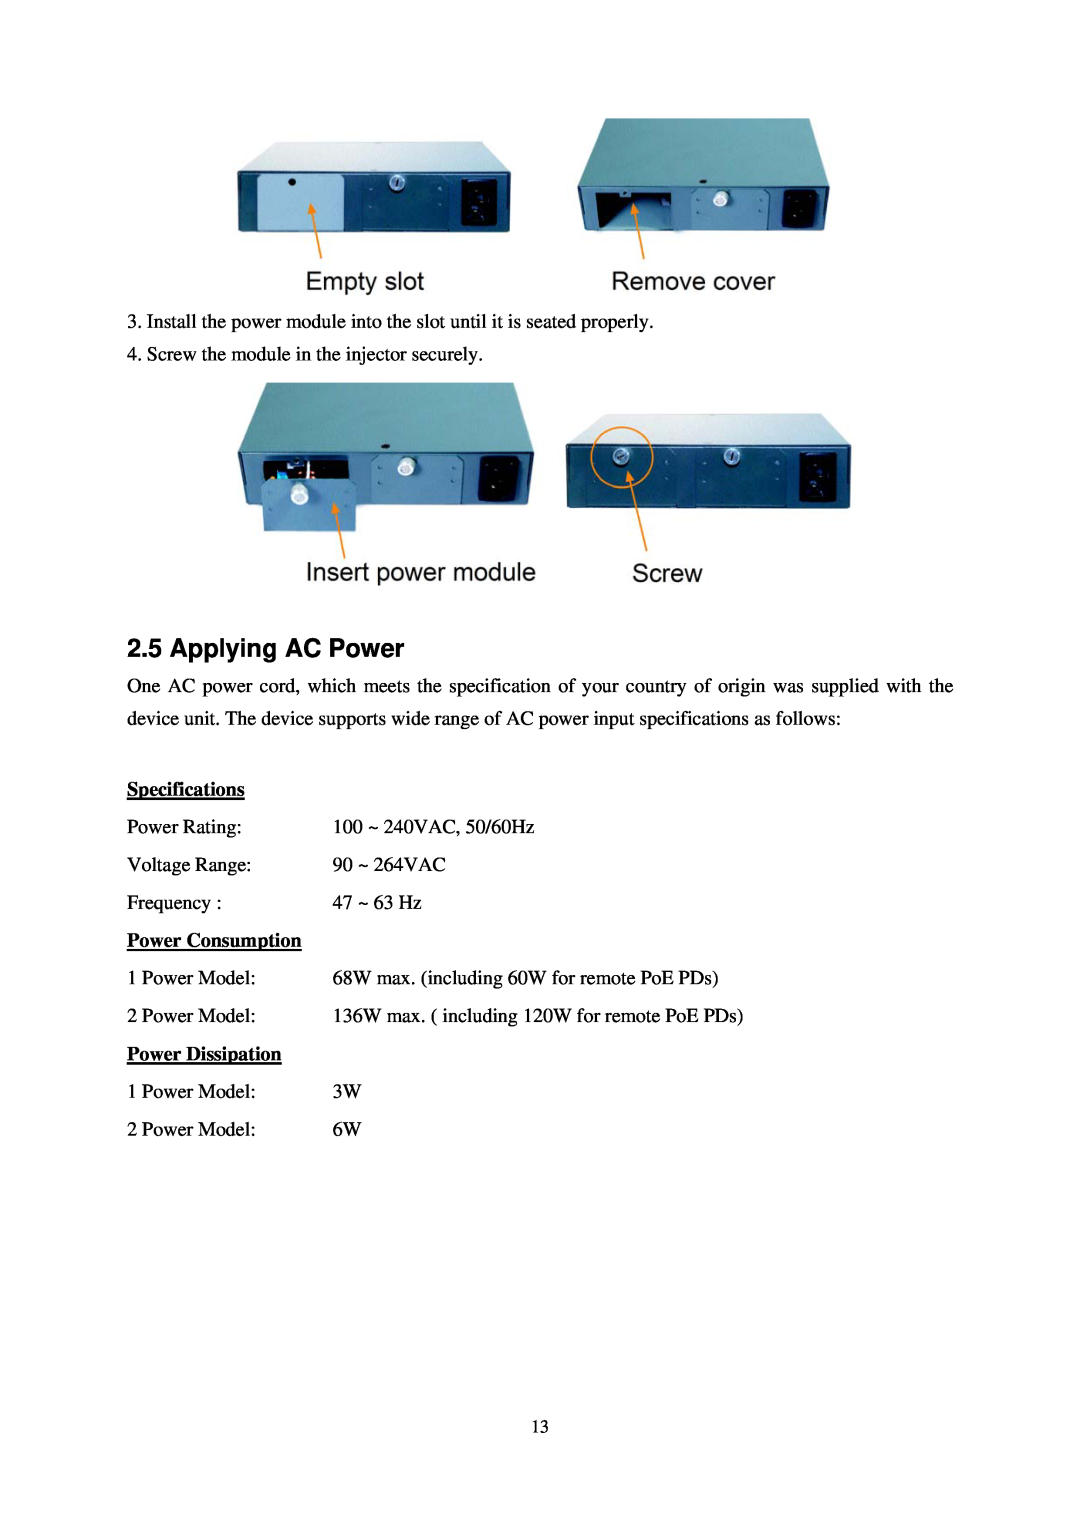 KTI Networks KPOE-800-2P, KPOE-800-1P manual Applying AC Power, Specifications, Power Consumption, Power Dissipation 